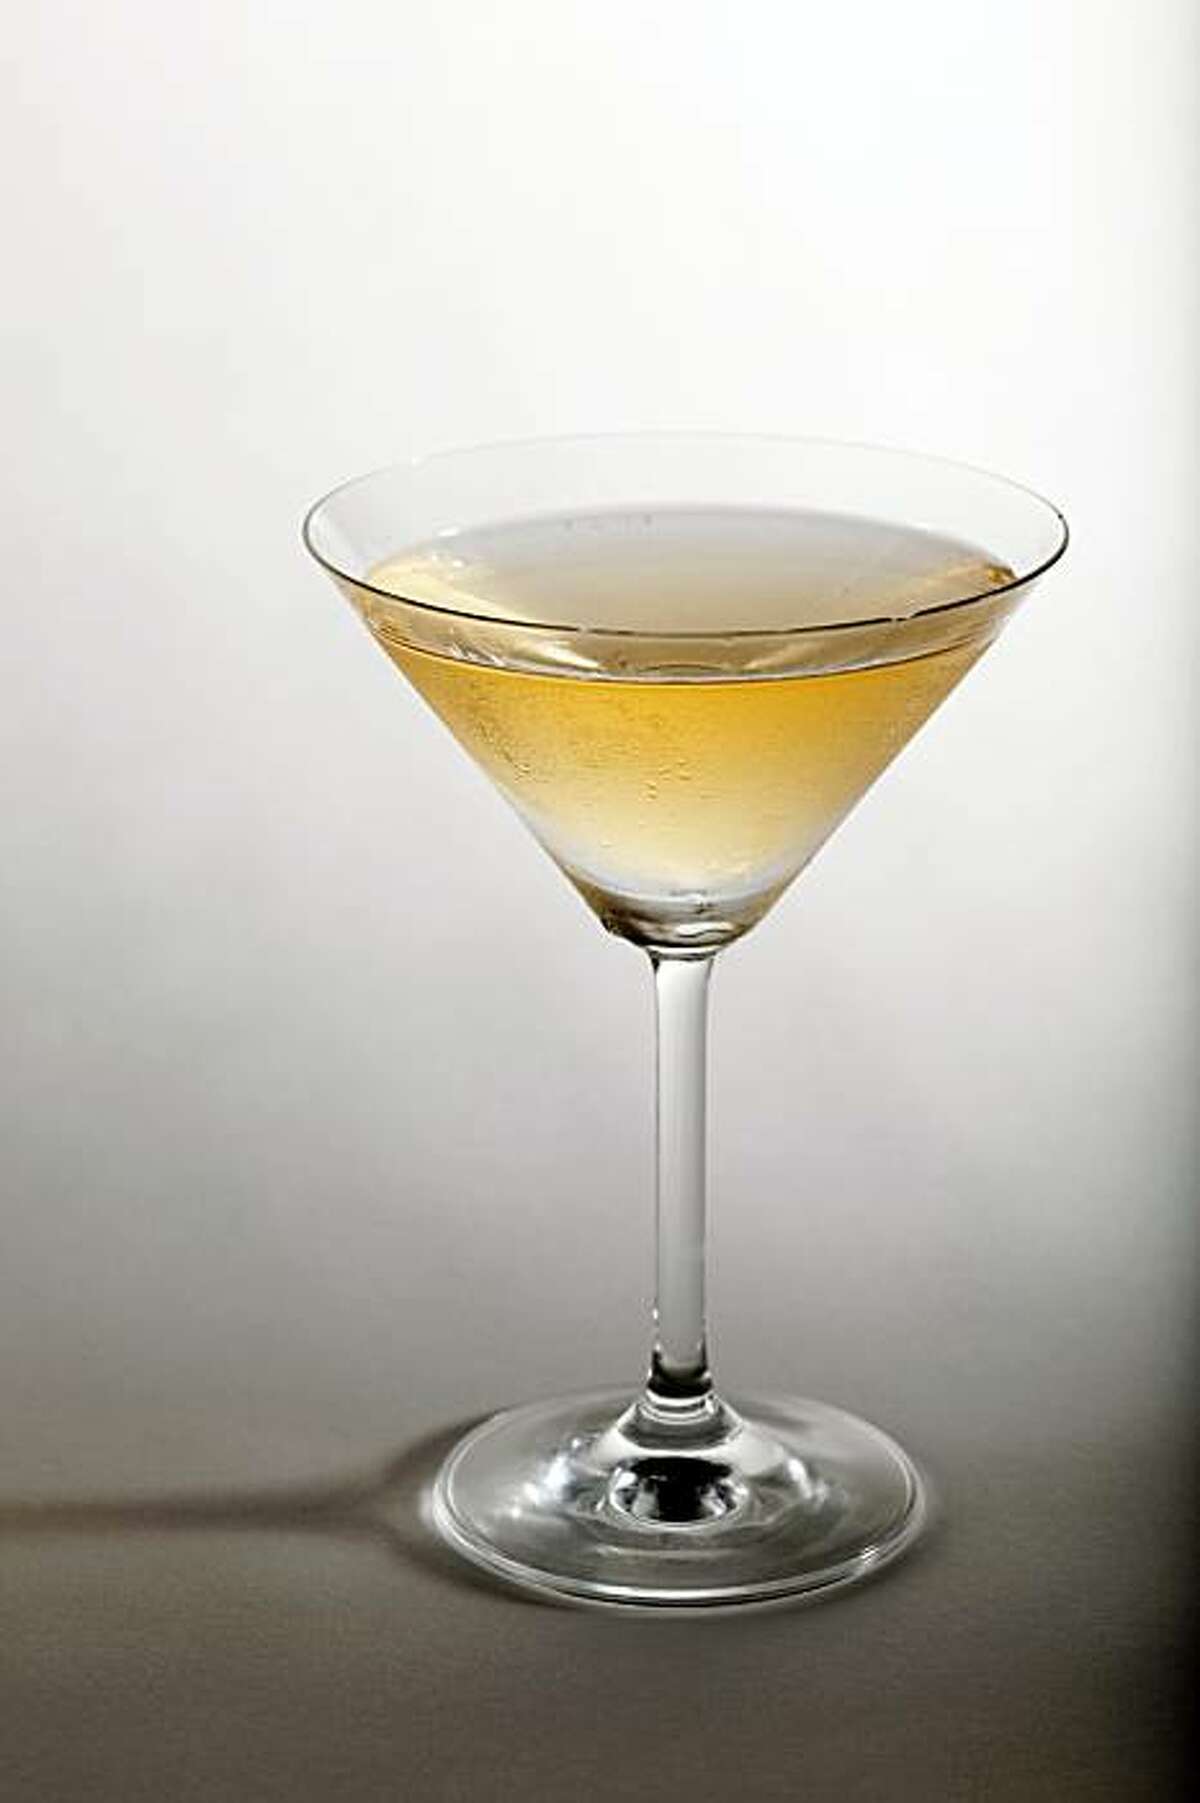 Claridge cocktail in San Francisco, Calif., on September 16, 2009. Drink styled by Rose Amoroso.